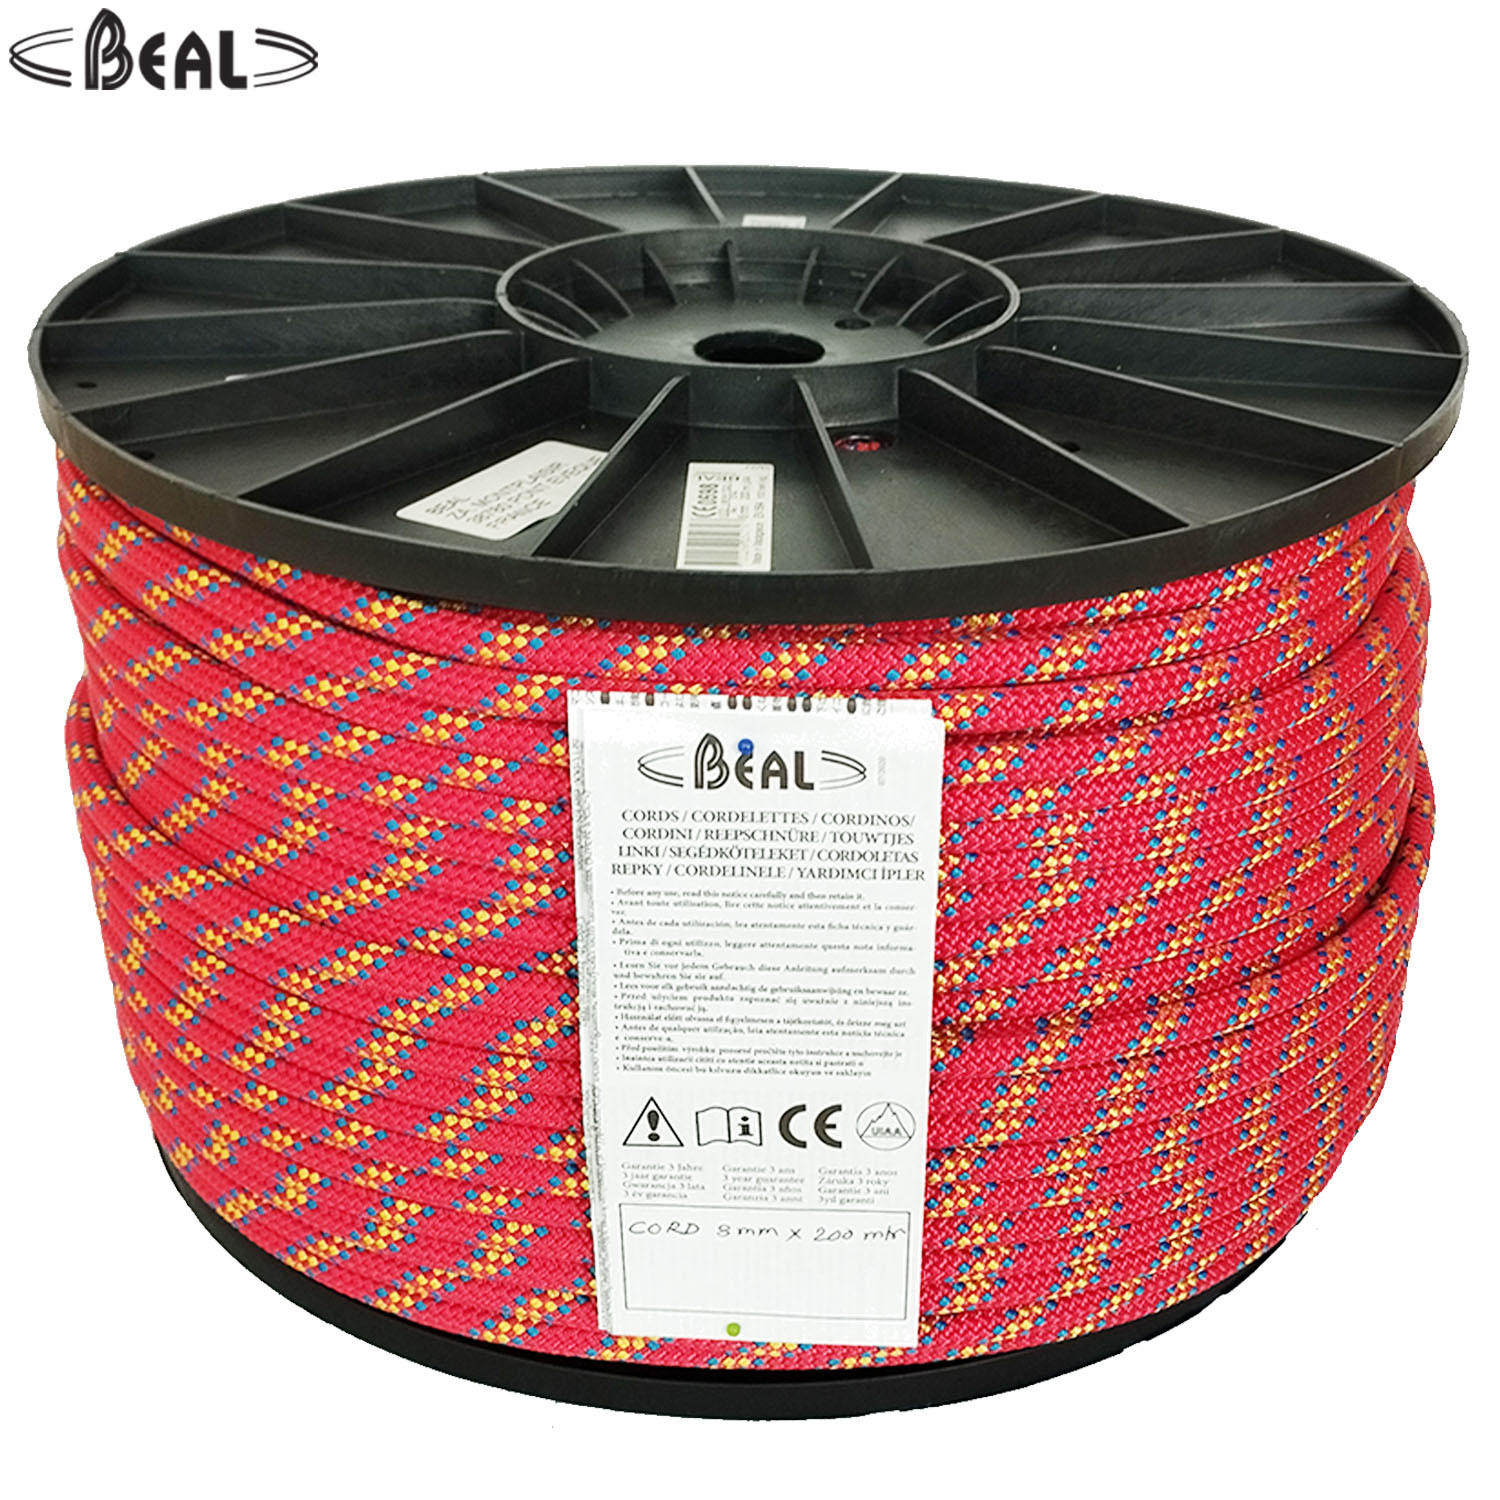 Beal 8 mm Accessory Cord 200 Mtr. Roll